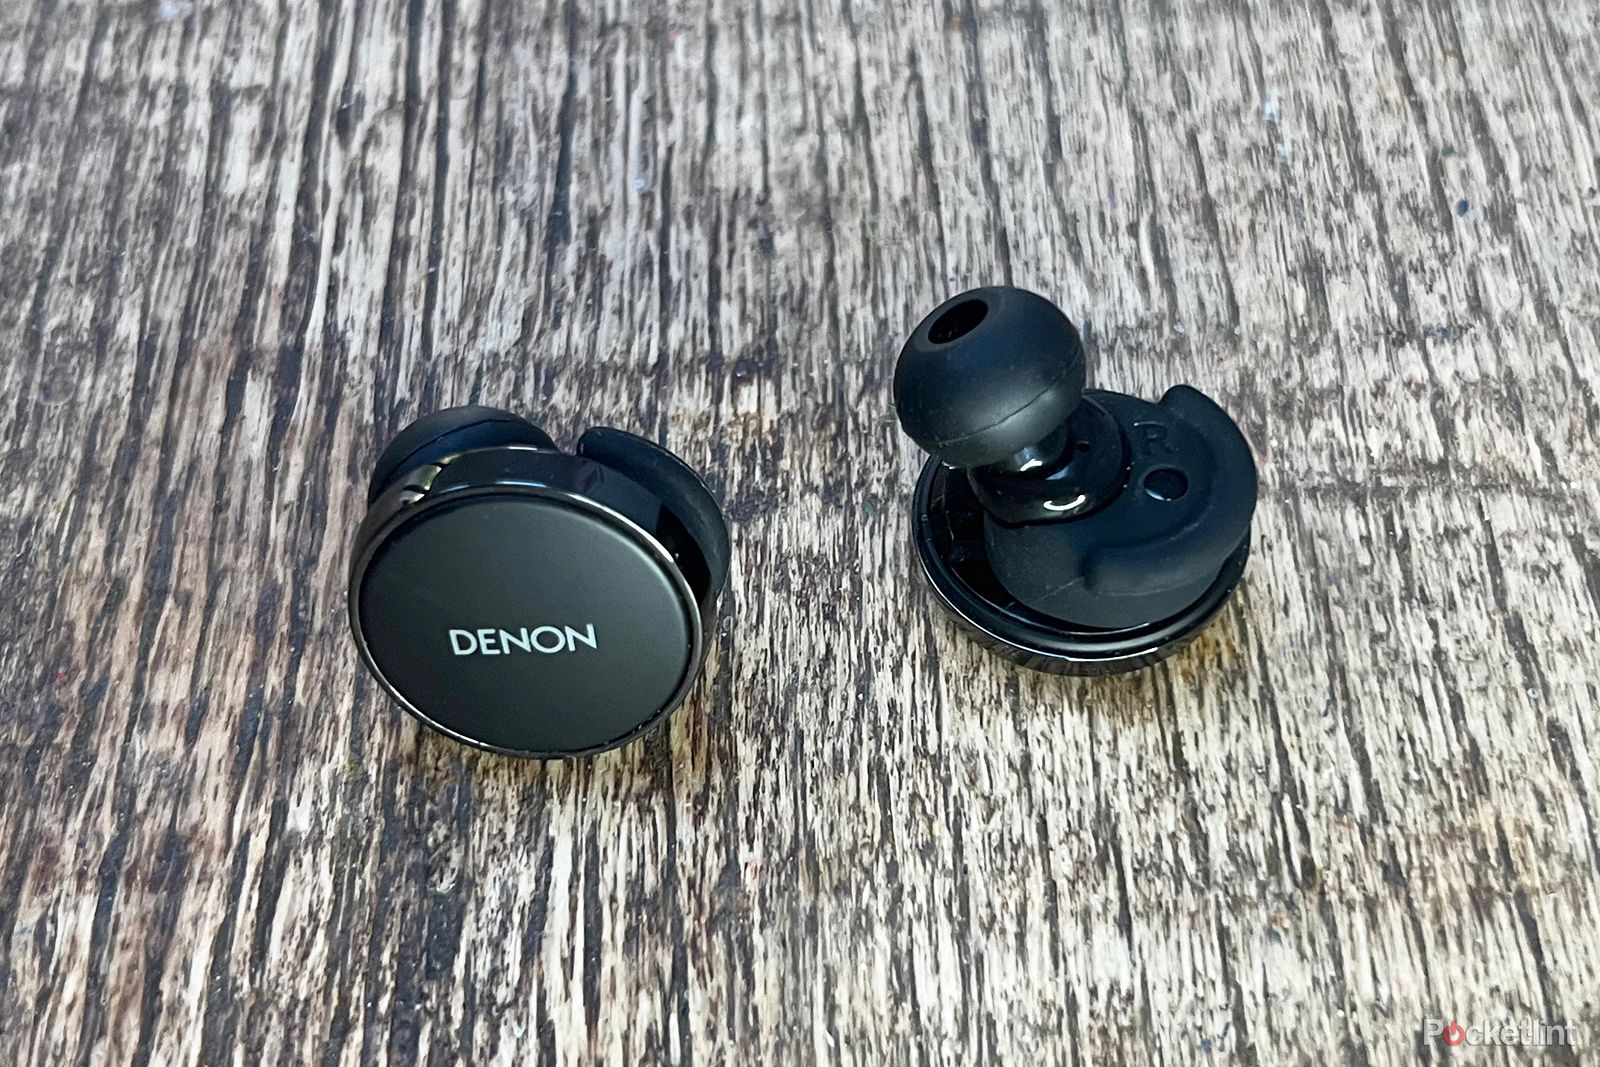 Denon PerL Pro earbuds on wooden table